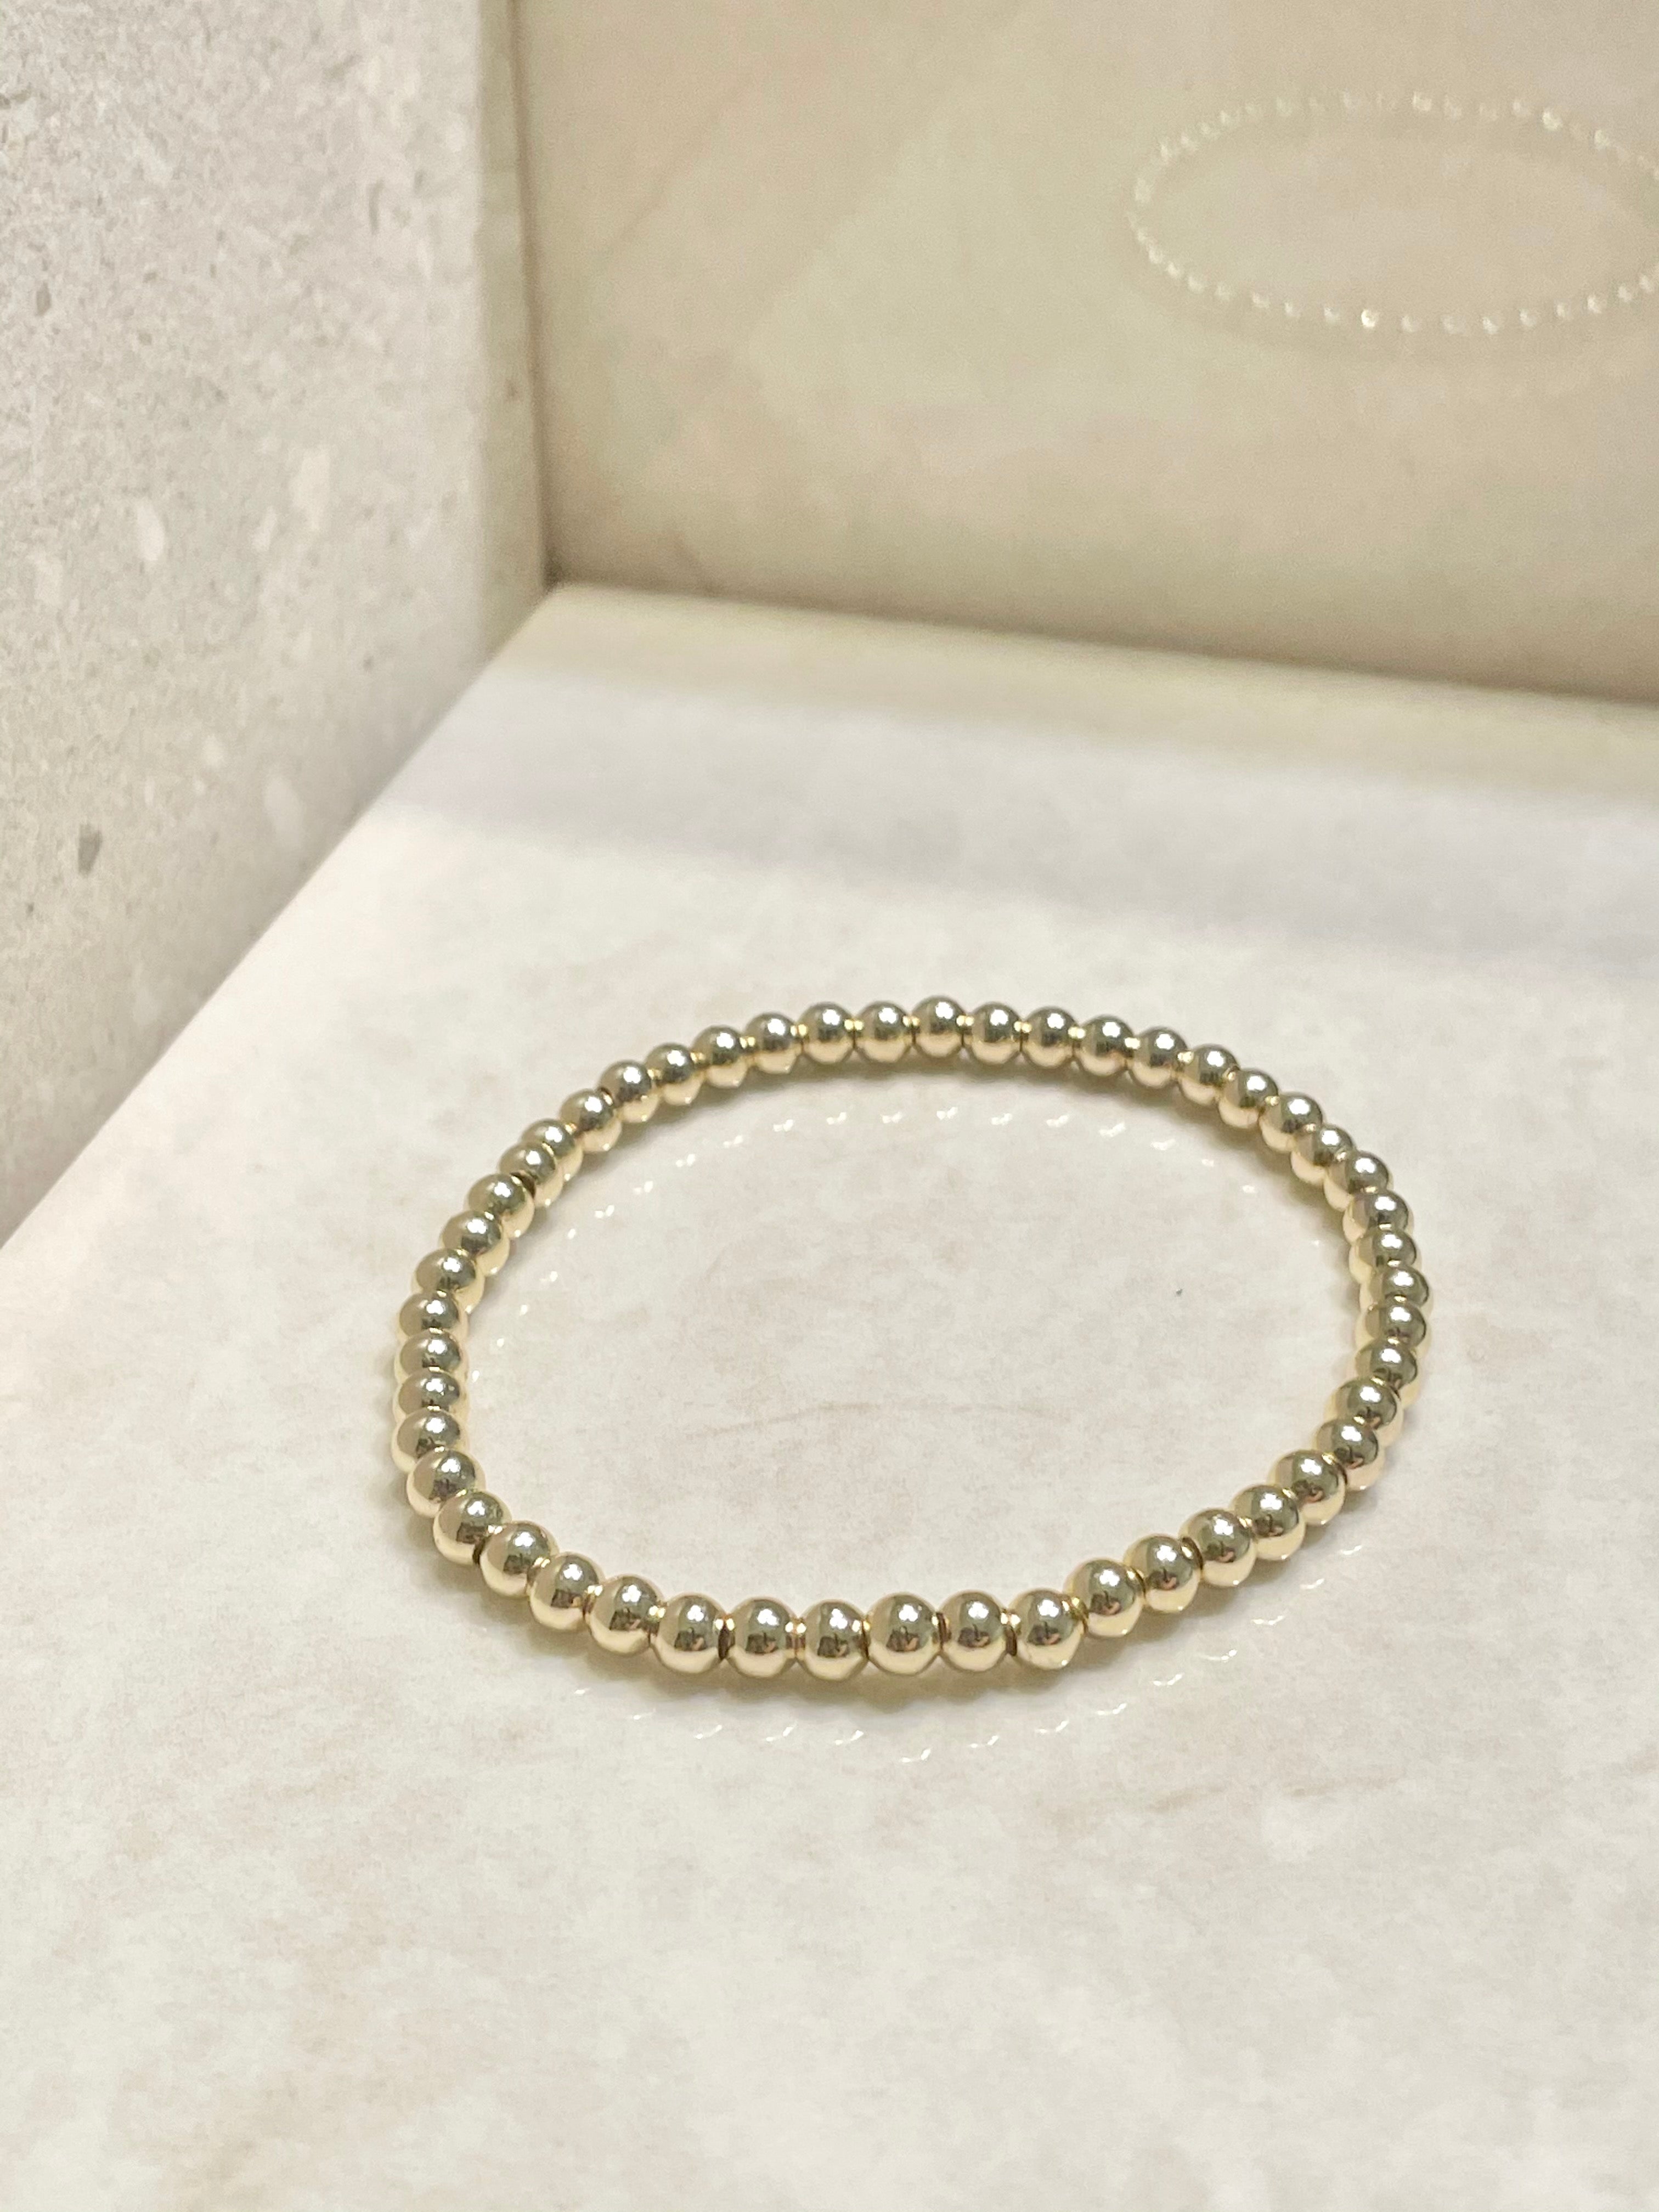 gold plated ball bracelets - gold beaded bracelets - gold beaded ball bracelet that gives back to charity